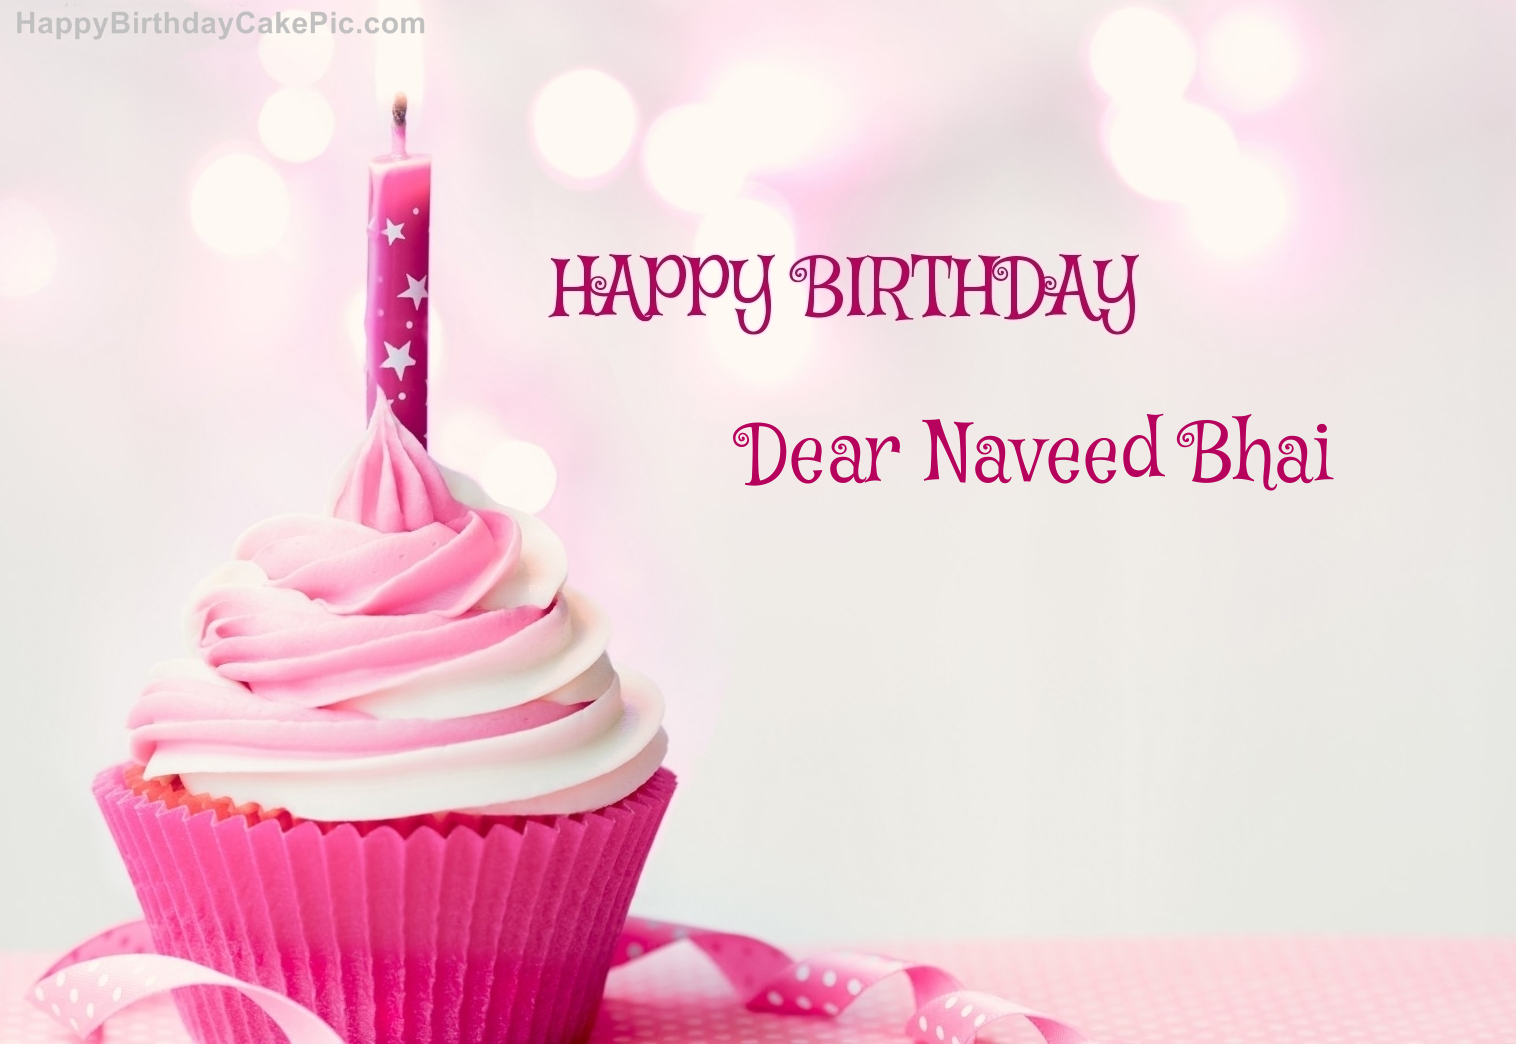 ️ Happy Birthday Cupcake Candle Pink Cake For Dear Naveed Bhai